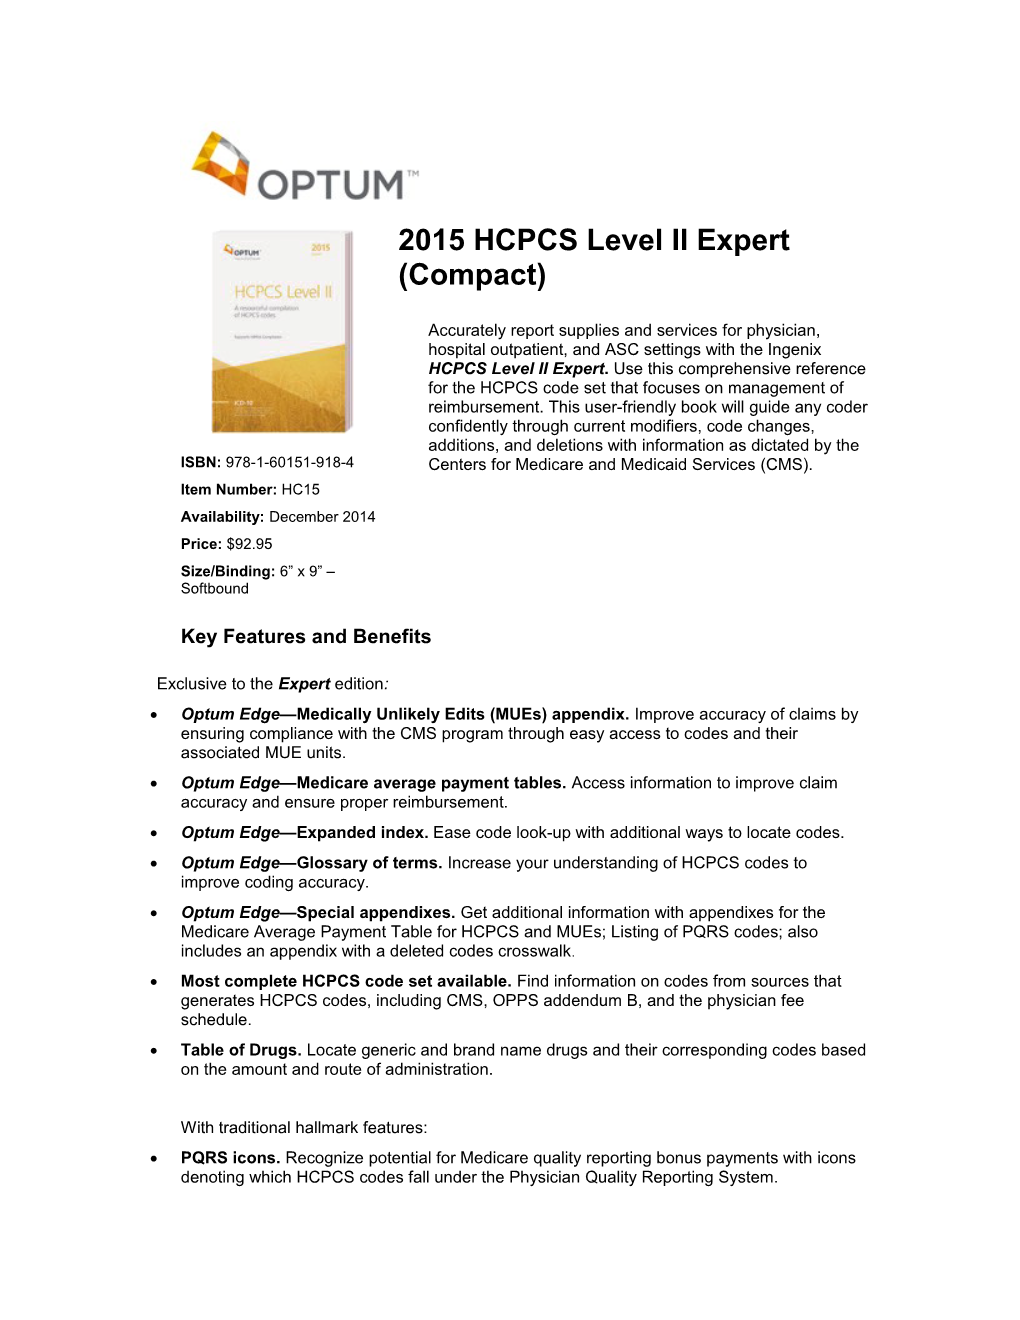 Optum Edge Medically Unlikely Edits (Mues) Appendix. Improve Accuracy of Claims by Ensuring